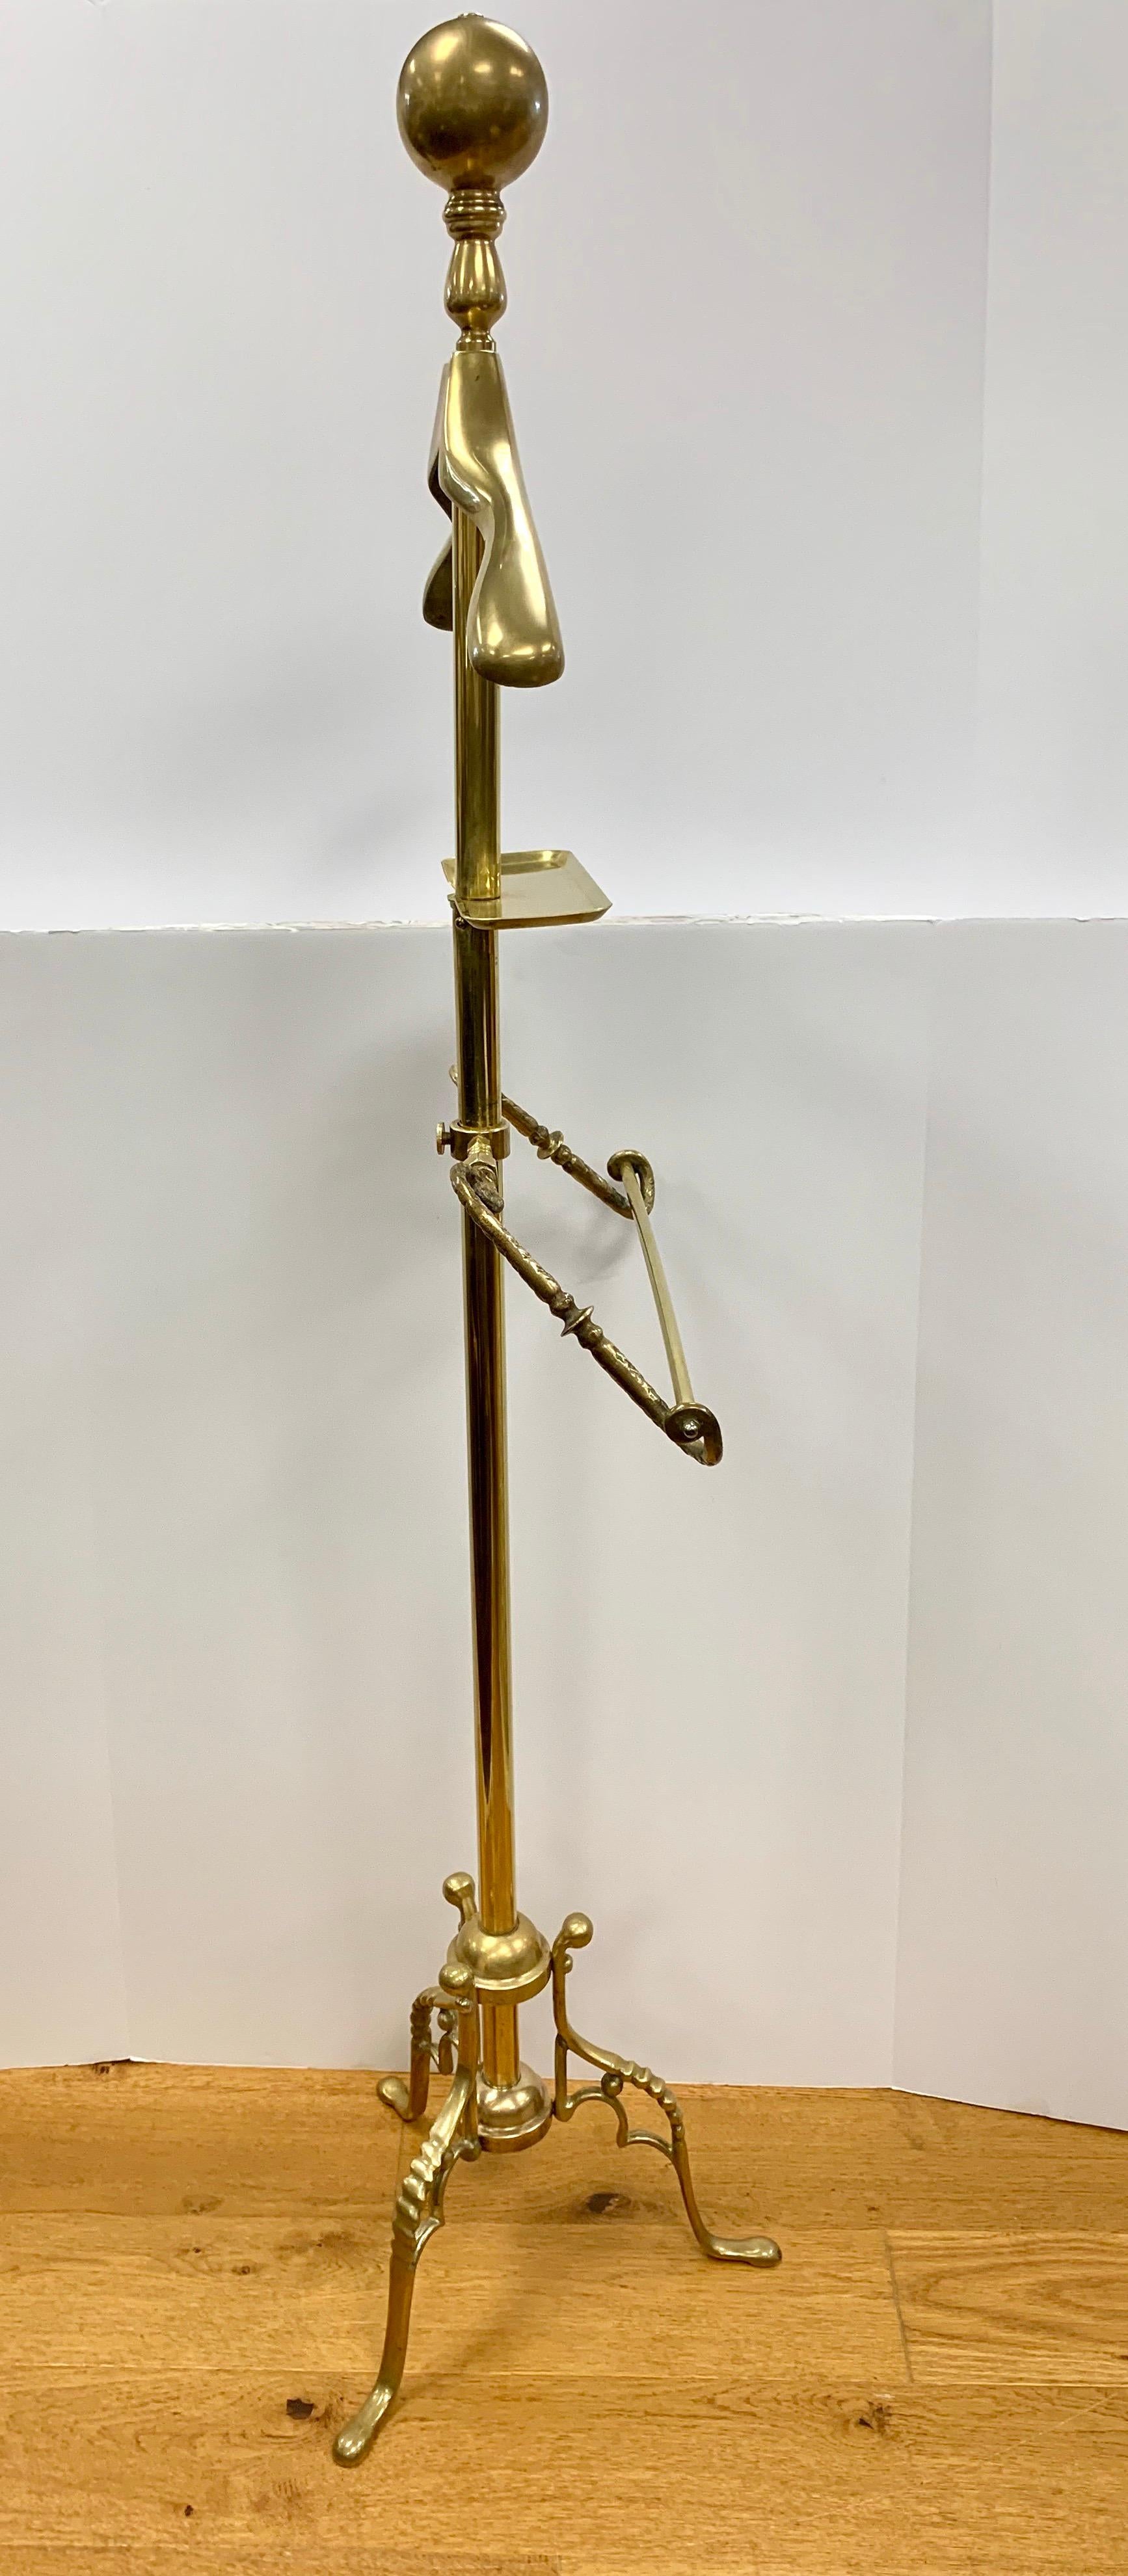 Elegant all brass vintage gentlemen's valet. For the man who has arrived! Sturdy and gorgeous.